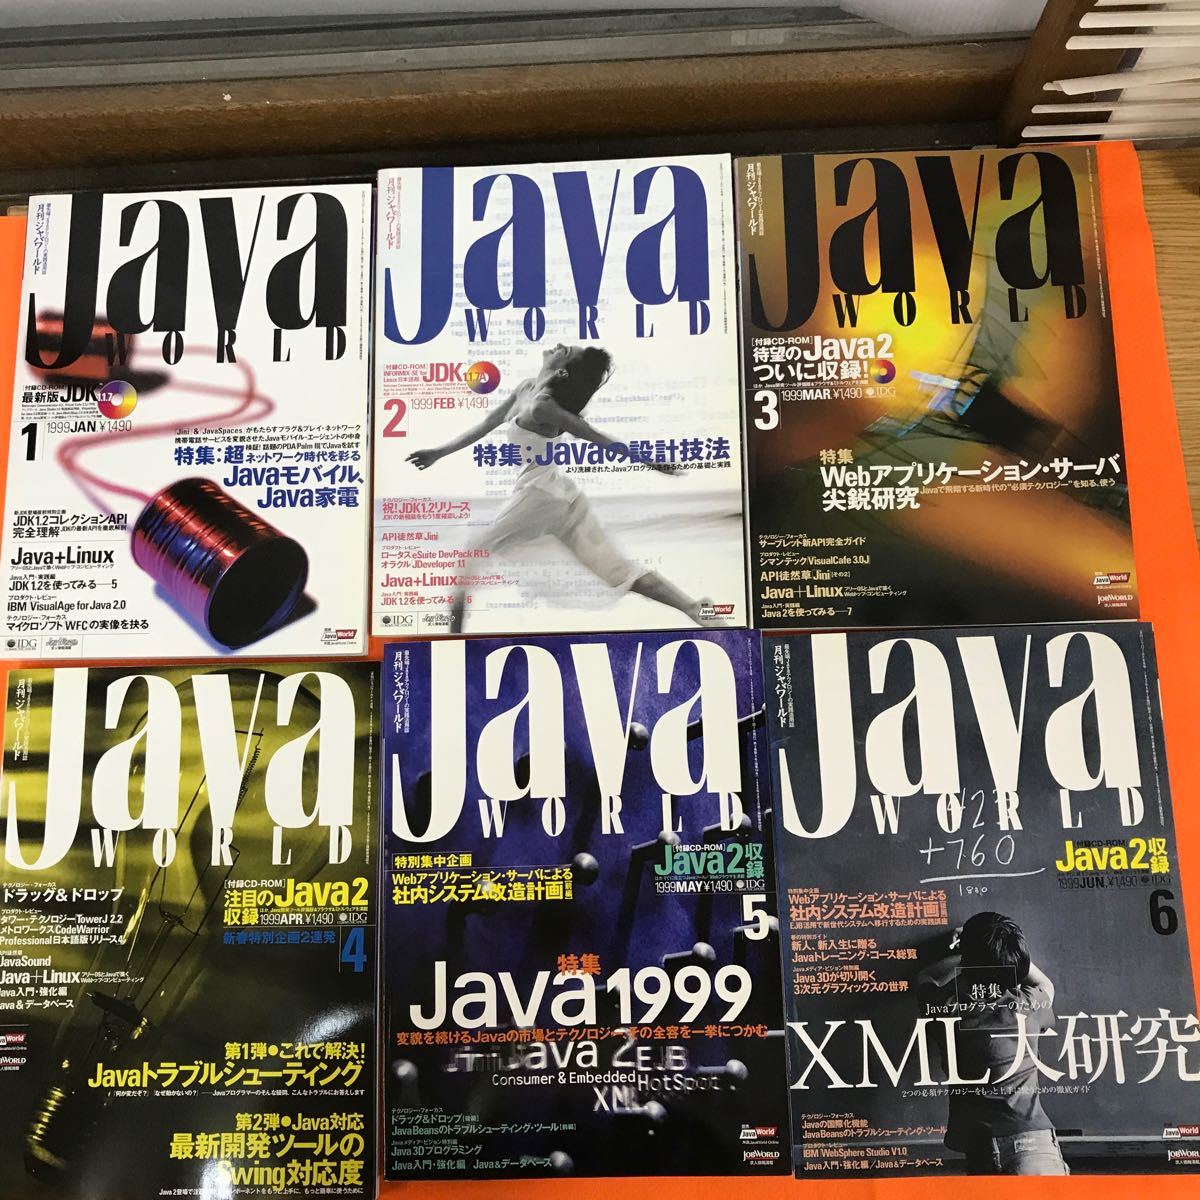 a09-005 monthly Java world 1999 year total 13 pcs. summarize ( appendix all pcs. equipped )